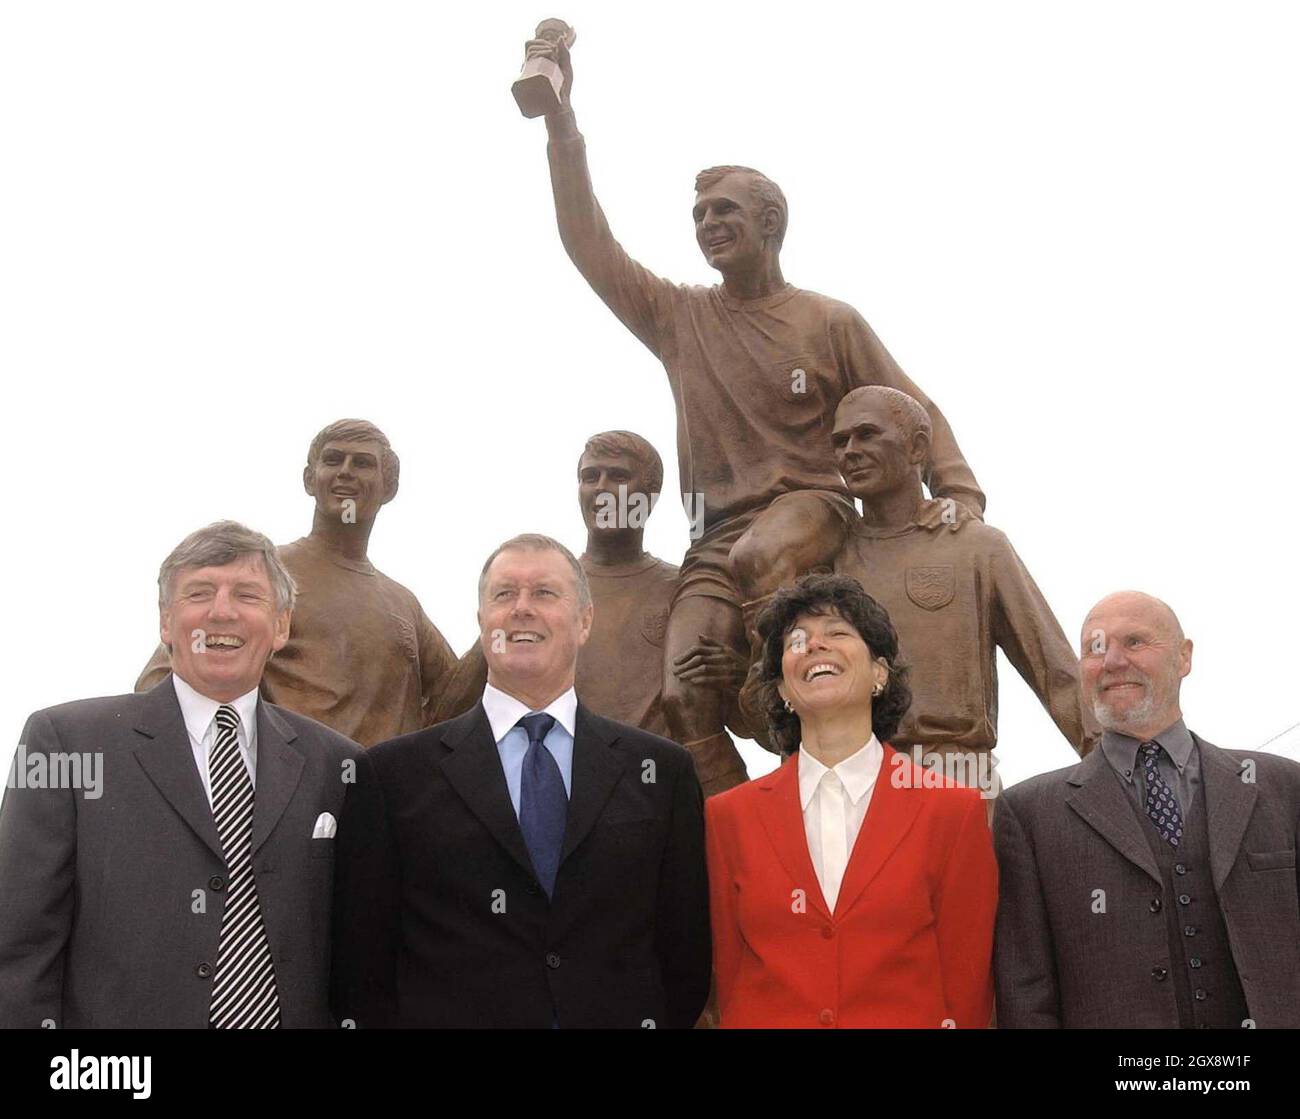 Former England footballers and members of the 1966 World Cup winning team, Martin Peters MBE (left), Sir Geoff Hurst MBE (second left), Ray Wilson MBE with Stephanie Moore, widow of England Captain Bobby Moore, stand in front of the statue unveiled by the Duke of York at West Ham's Upton Park ground in east London. Half length, suit  Â©Anwar Hussein/allaction.co.uk  Stock Photo